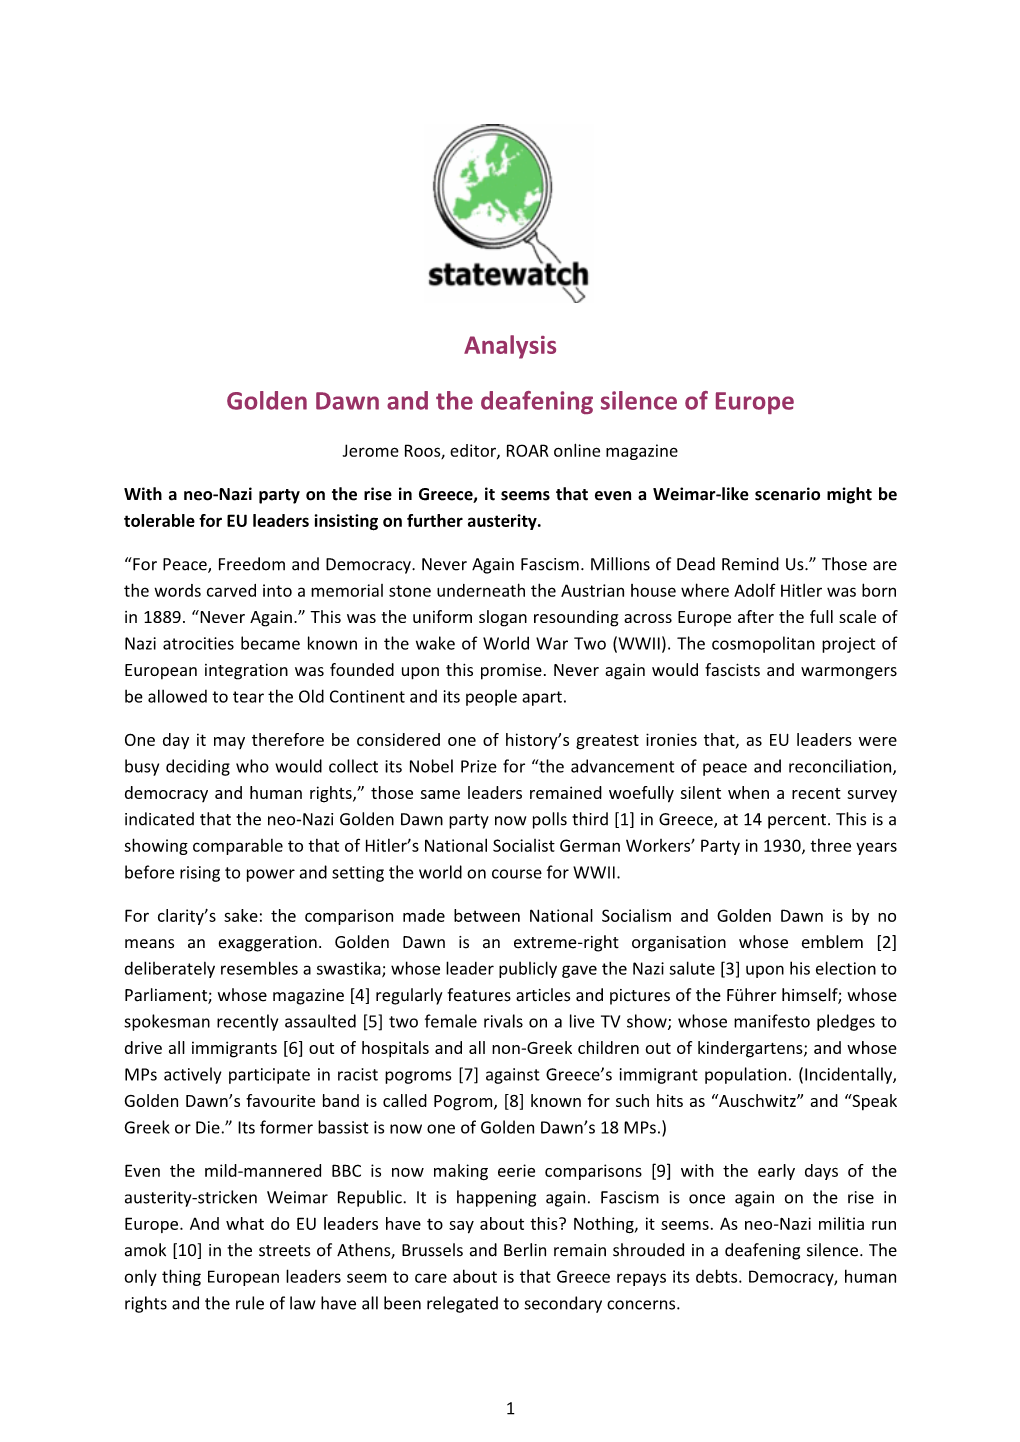 Golden Dawn and the Deafening Silence of Europe